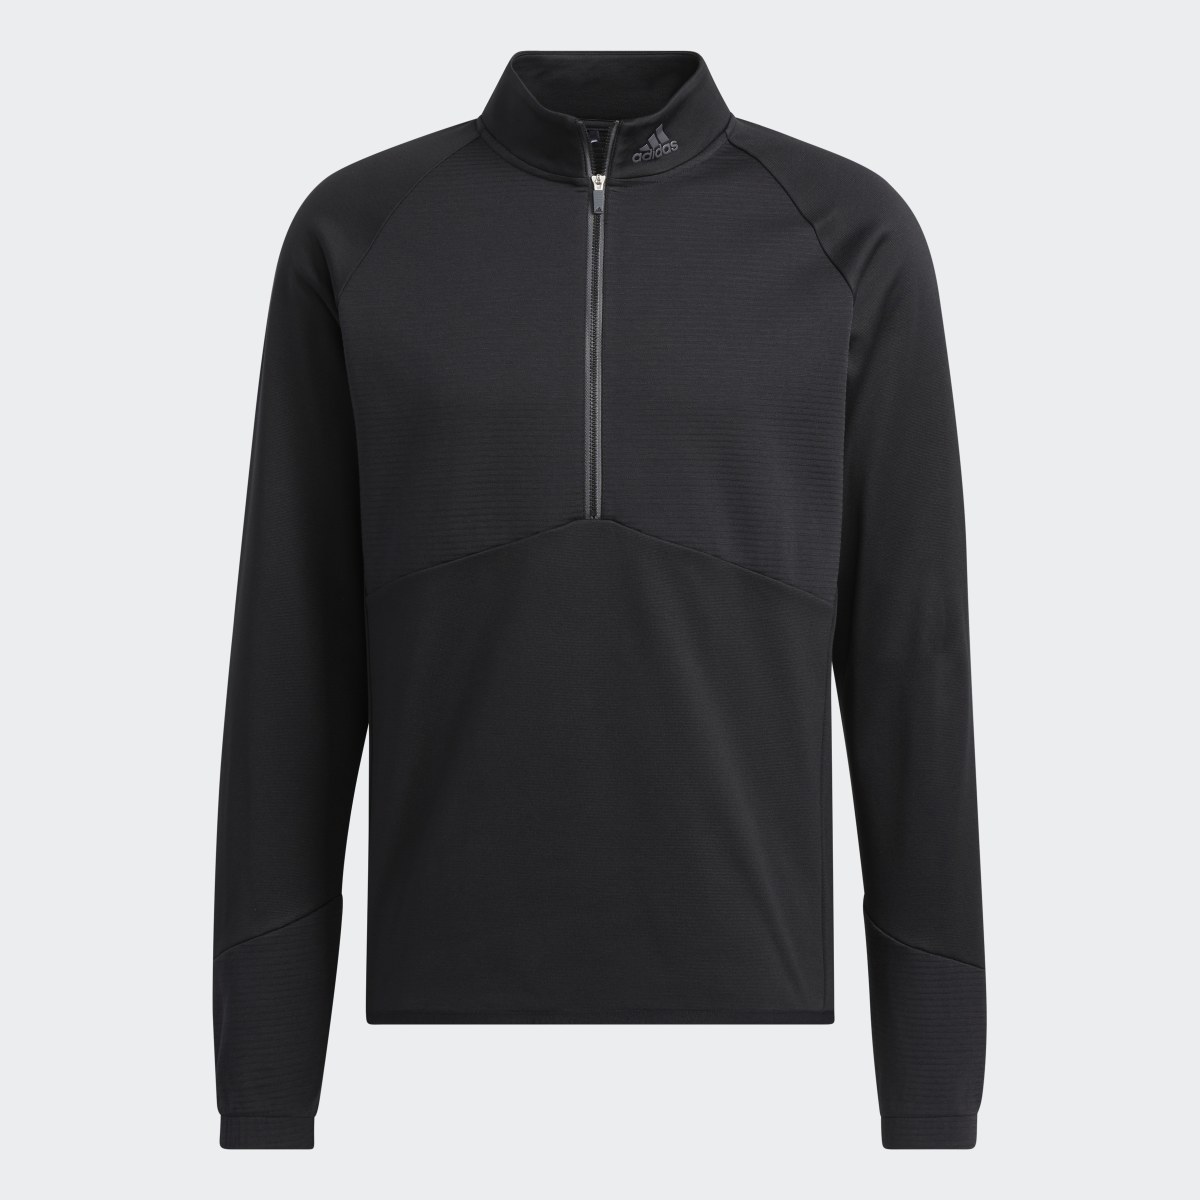 Adidas COLD.RDY 1/4-Zip Pullover. 5